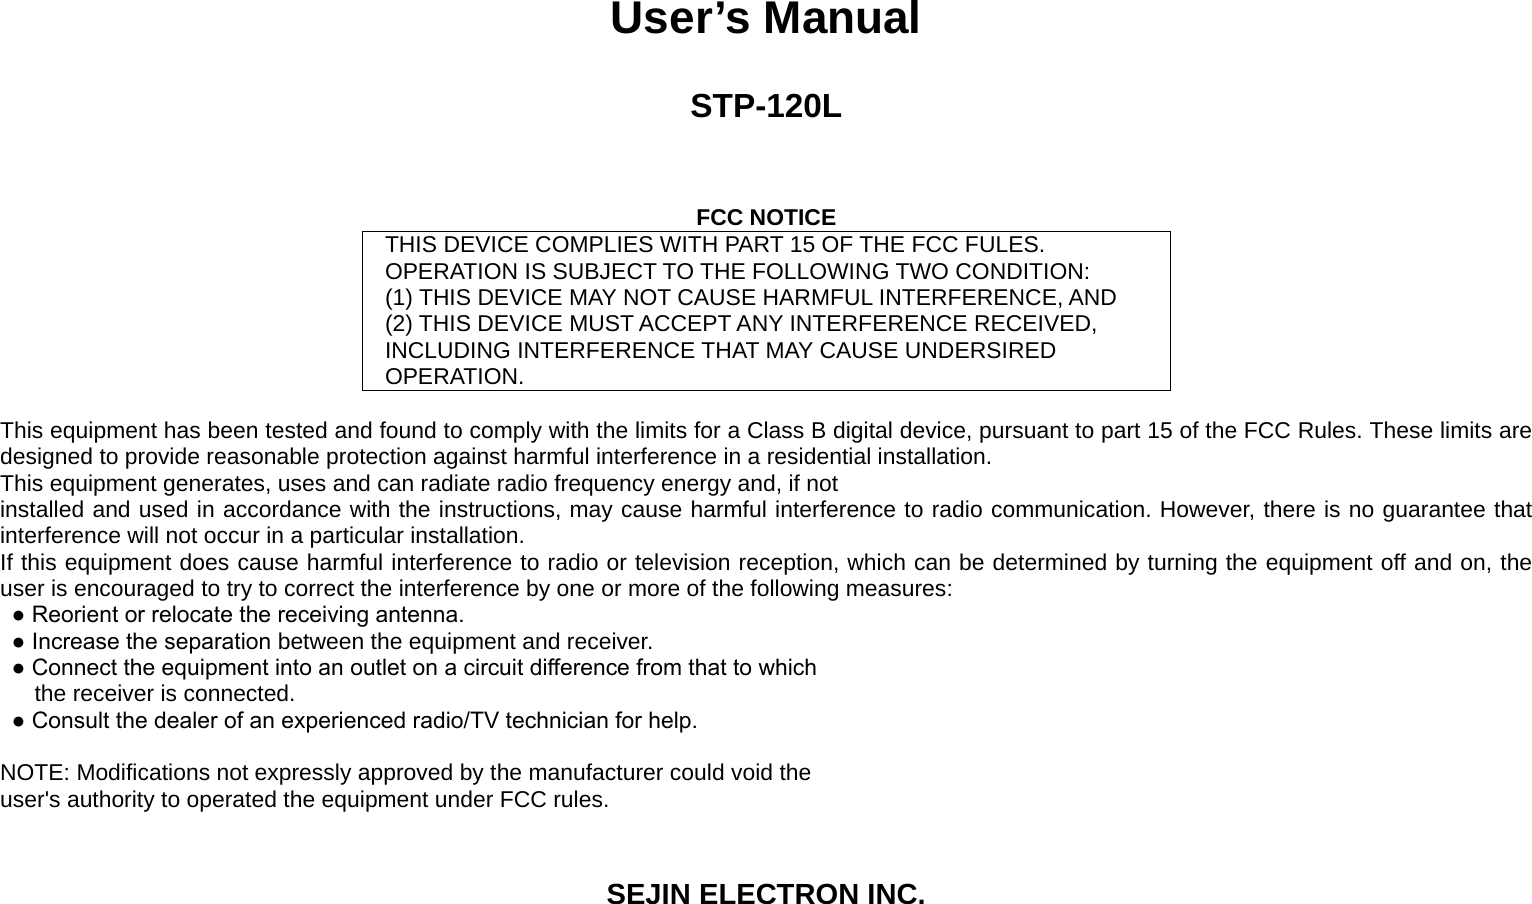 User’s Manual  STP-120L    FCC NOTICE THIS DEVICE COMPLIES WITH PART 15 OF THE FCC FULES. OPERATION IS SUBJECT TO THE FOLLOWING TWO CONDITION: (1) THIS DEVICE MAY NOT CAUSE HARMFUL INTERFERENCE, AND (2) THIS DEVICE MUST ACCEPT ANY INTERFERENCE RECEIVED, INCLUDING INTERFERENCE THAT MAY CAUSE UNDERSIRED OPERATION.  This equipment has been tested and found to comply with the limits for a Class B digital device, pursuant to part 15 of the FCC Rules. These limits are designed to provide reasonable protection against harmful interference in a residential installation. This equipment generates, uses and can radiate radio frequency energy and, if not installed and used in accordance with the instructions, may cause harmful interference to radio communication. However, there is no guarantee that interference will not occur in a particular installation. If this equipment does cause harmful interference to radio or television reception, which can be determined by turning the equipment off and on, the user is encouraged to try to correct the interference by one or more of the following measures: ● Reorient or relocate the receiving antenna. ● Increase the separation between the equipment and receiver. ● Connect the equipment into an outlet on a circuit difference from that to which the receiver is connected. ● Consult the dealer of an experienced radio/TV technician for help.  NOTE: Modifications not expressly approved by the manufacturer could void the user&apos;s authority to operated the equipment under FCC rules.  SEJIN ELECTRON INC. 